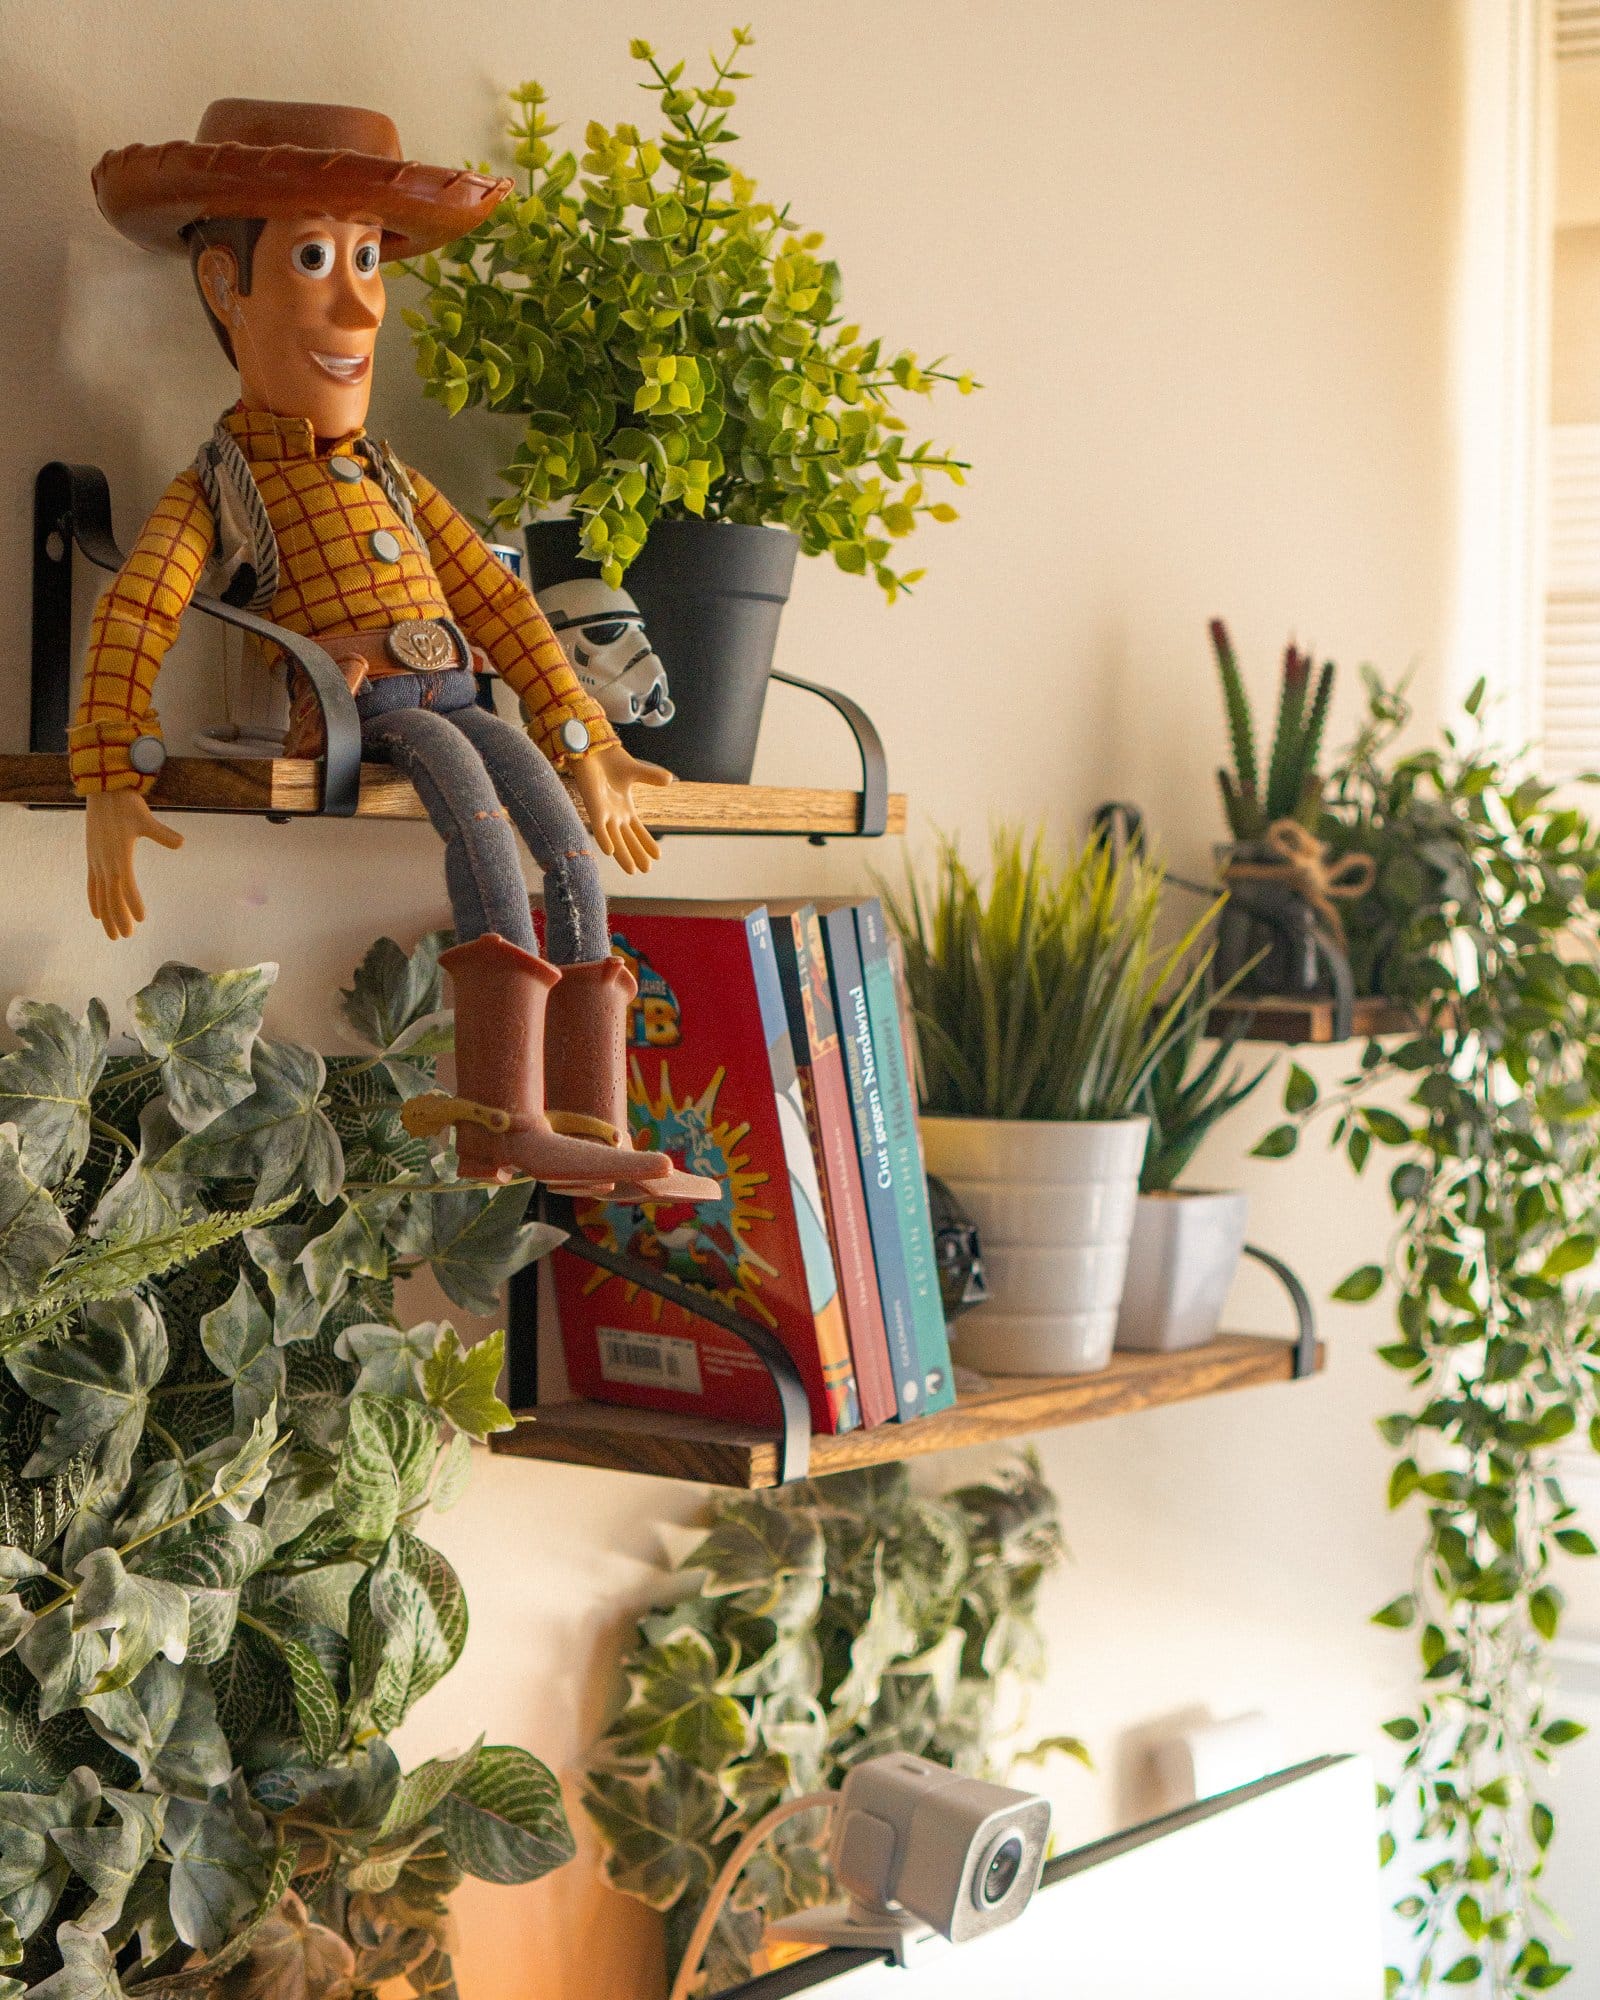 Wall-mounted shelves adorned with a Pixar’s Toy Story Woody figurine, potted plants, books, and a camera, against a backdrop of trailing houseplants, create a charming corner in a room